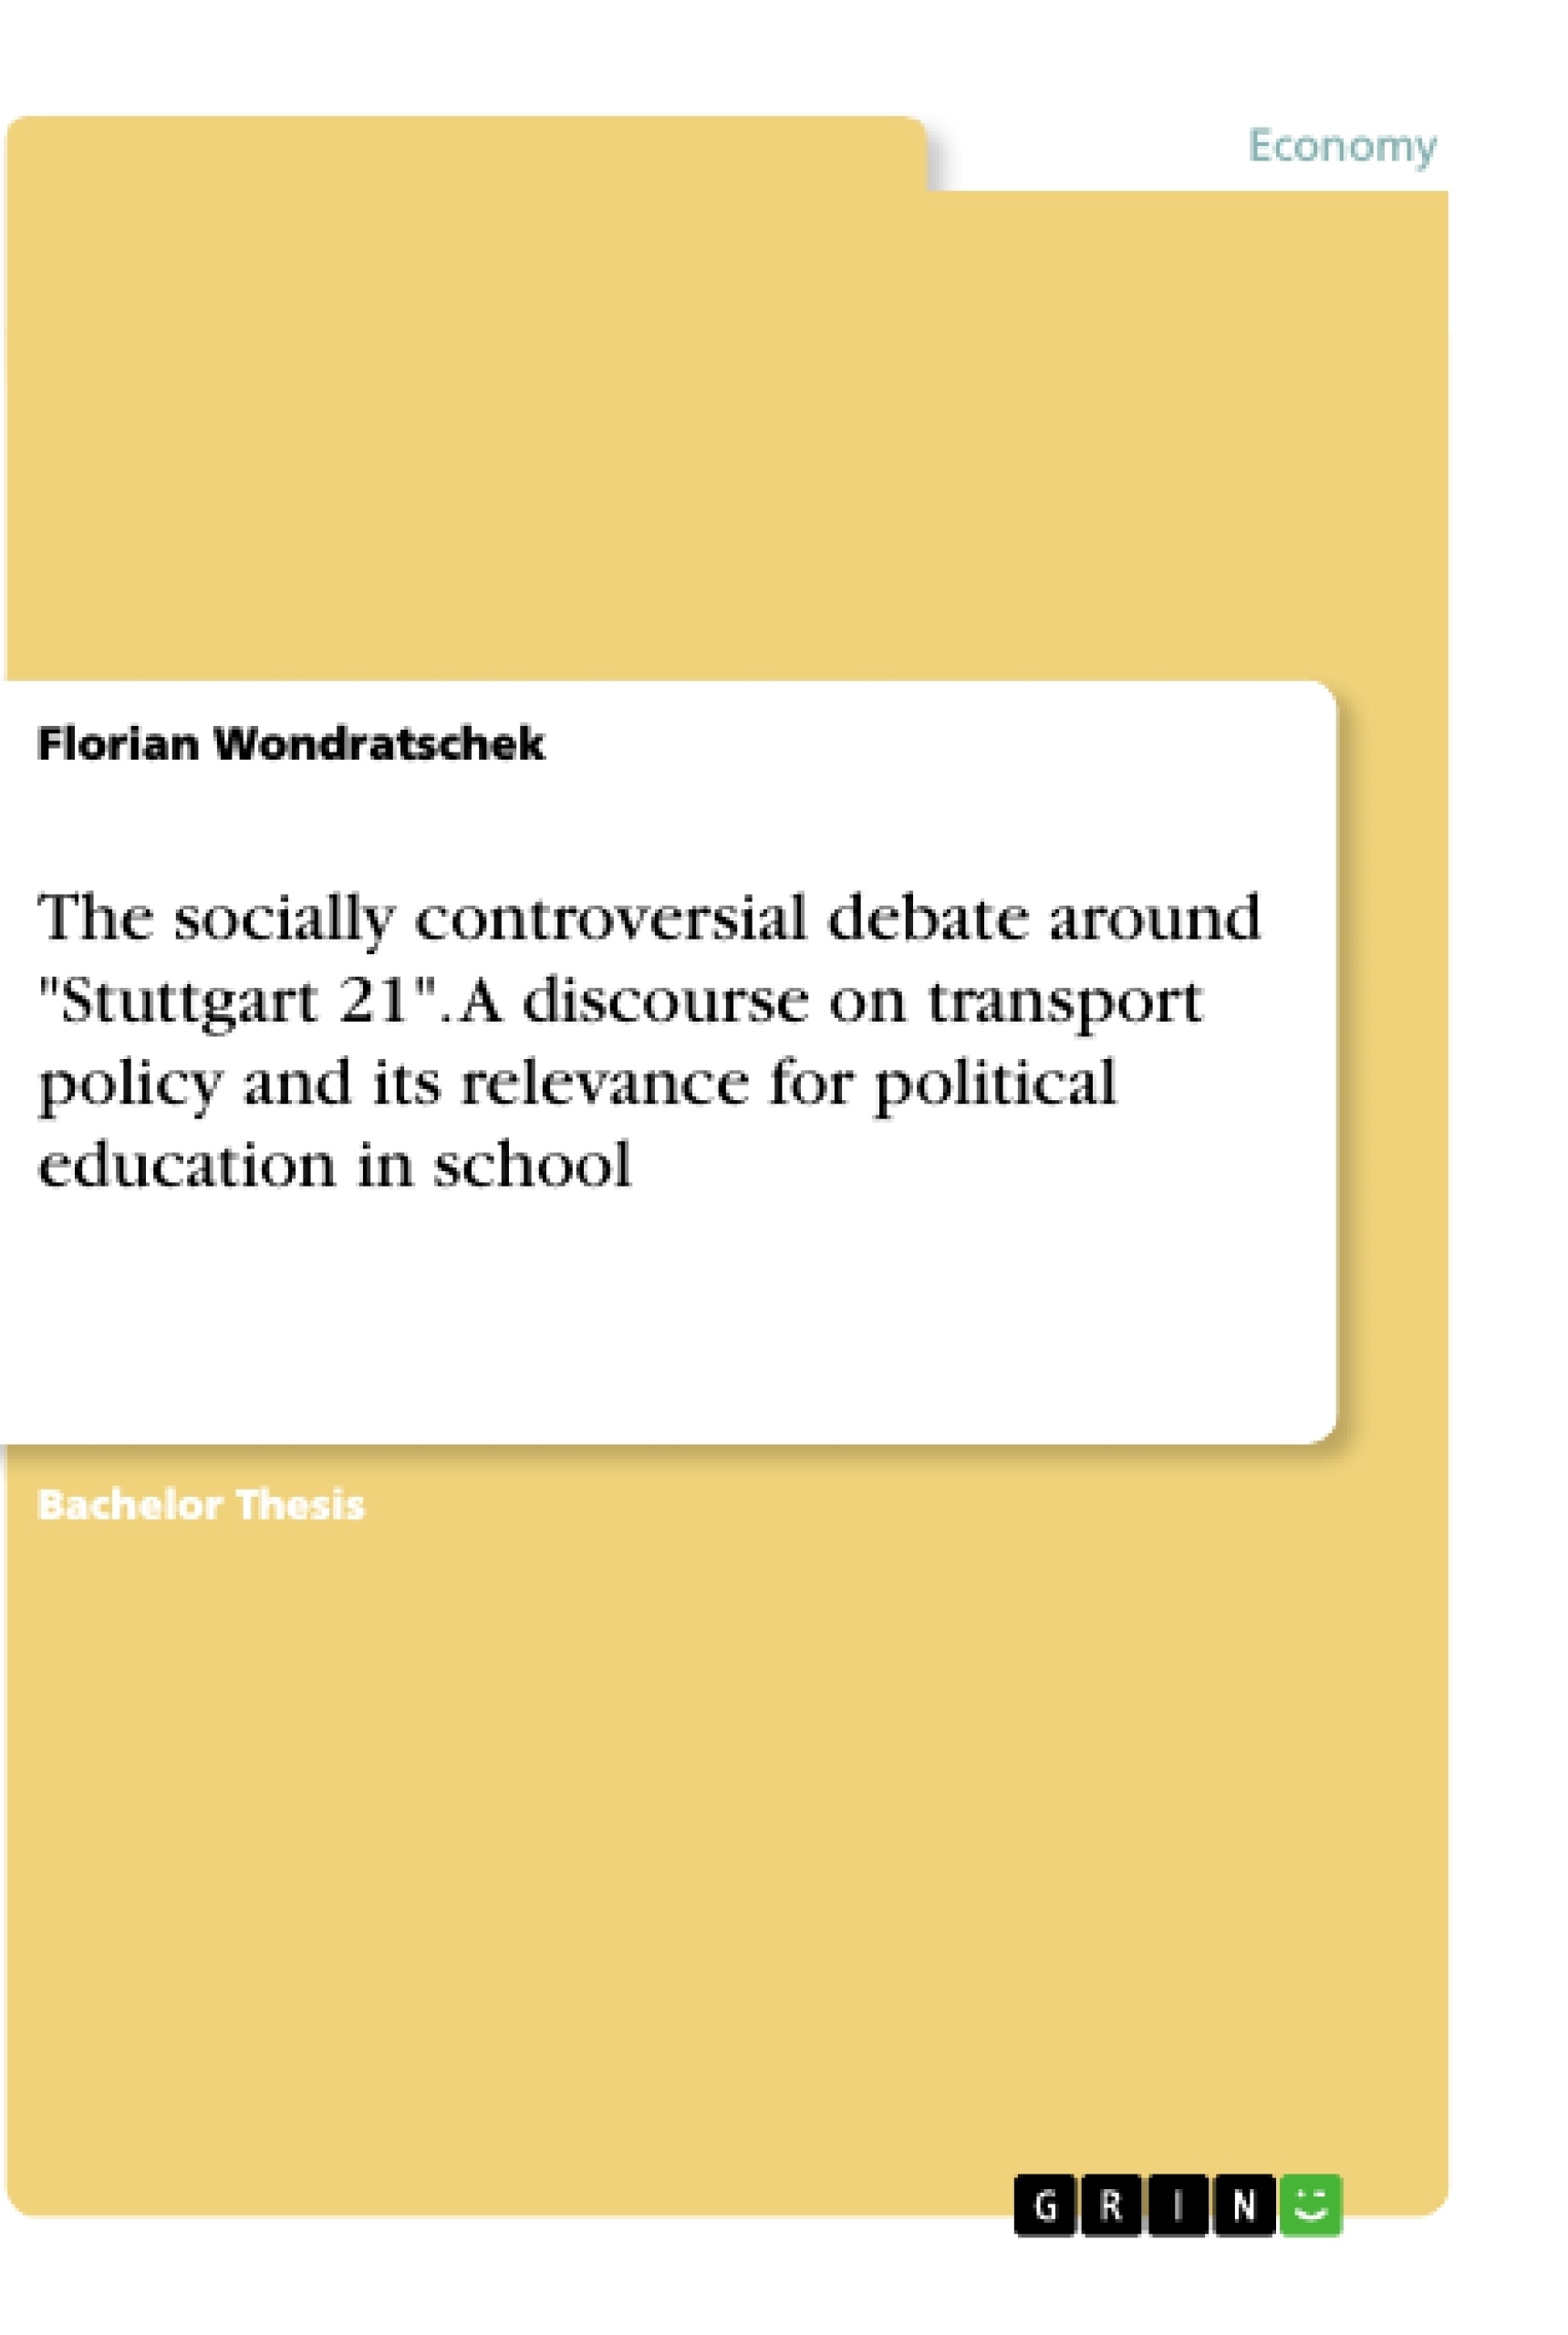 Título: The socially controversial debate around "Stuttgart 21". A discourse on transport policy and its relevance for political education in school